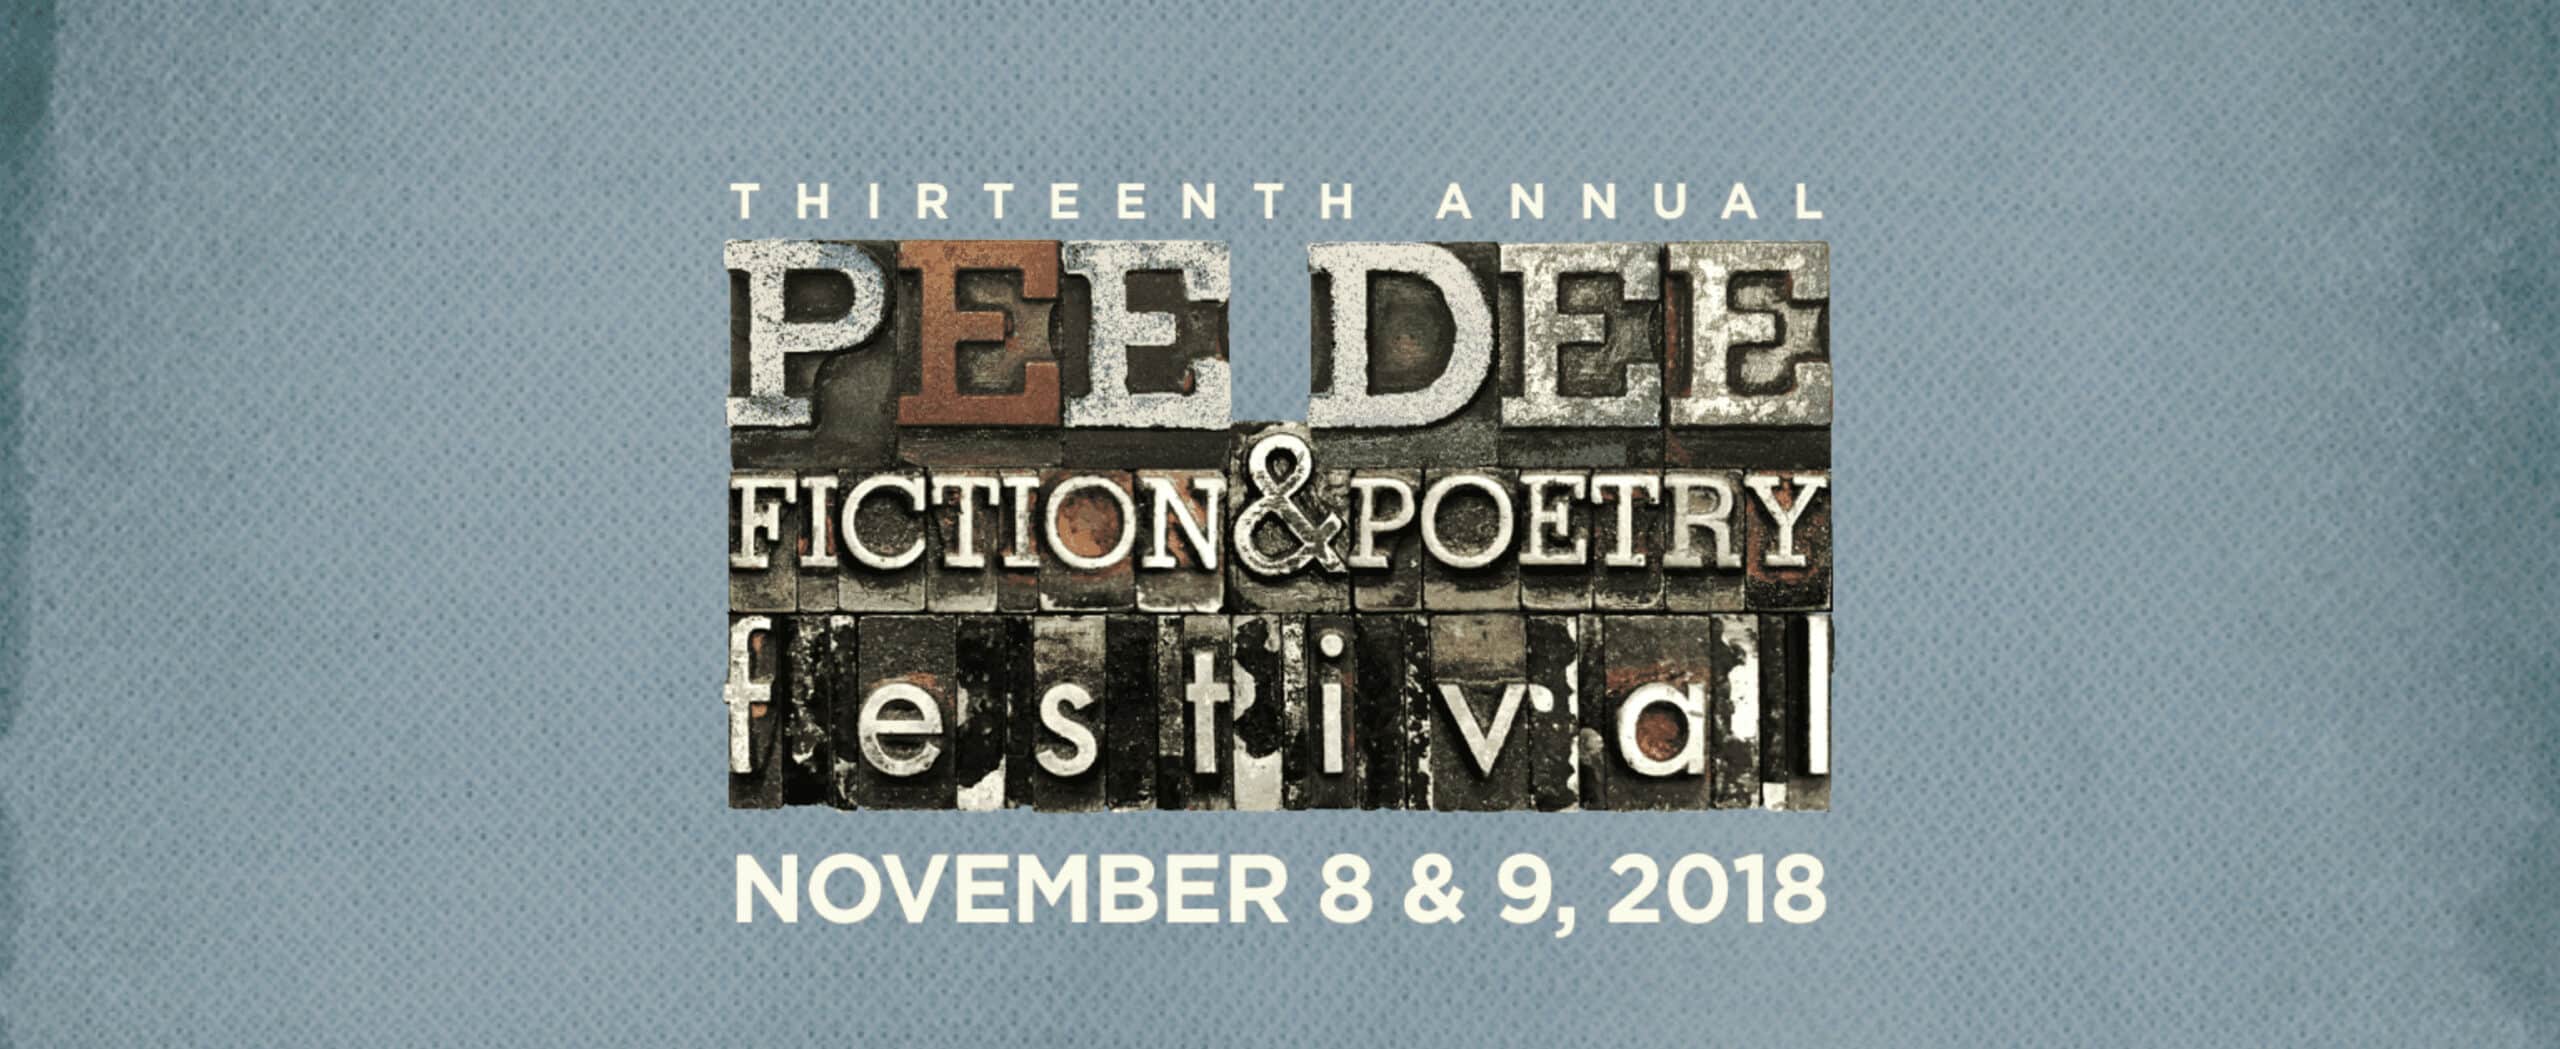 New York Times bestselling author to headline FMU’s Pee Dee Fiction and Poetry Festival